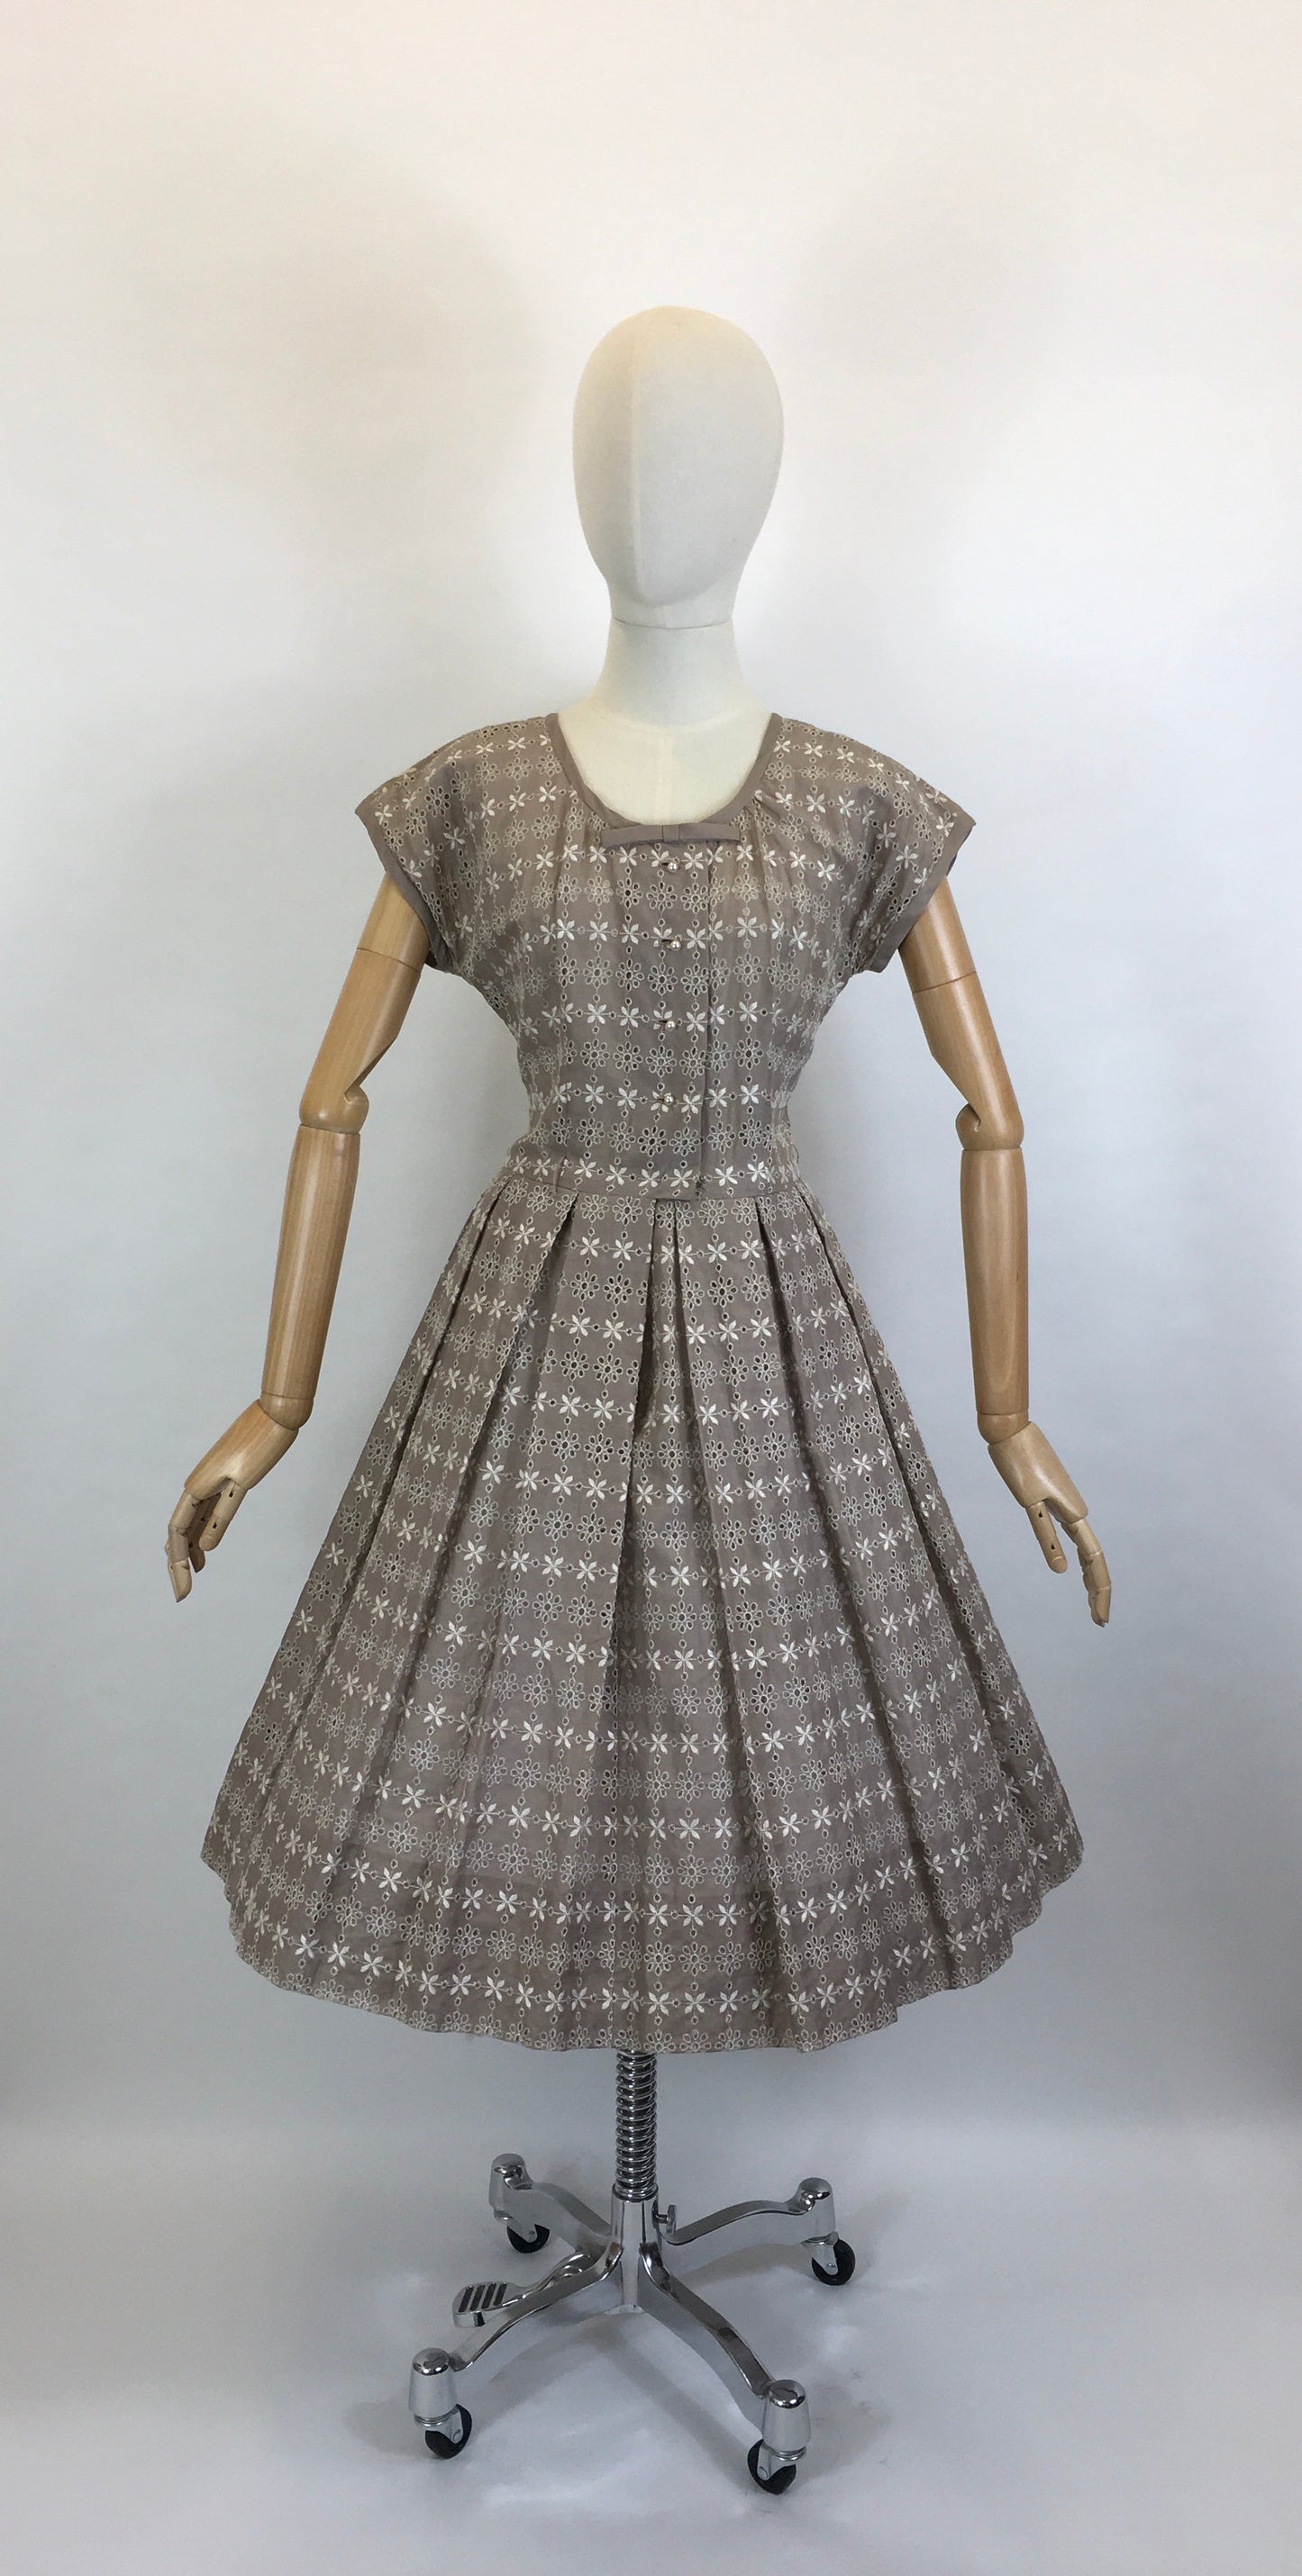 Original 1950’s Darling Broderie Anglaise Cotton Day Dress - In a Soft Fawn with White Accents